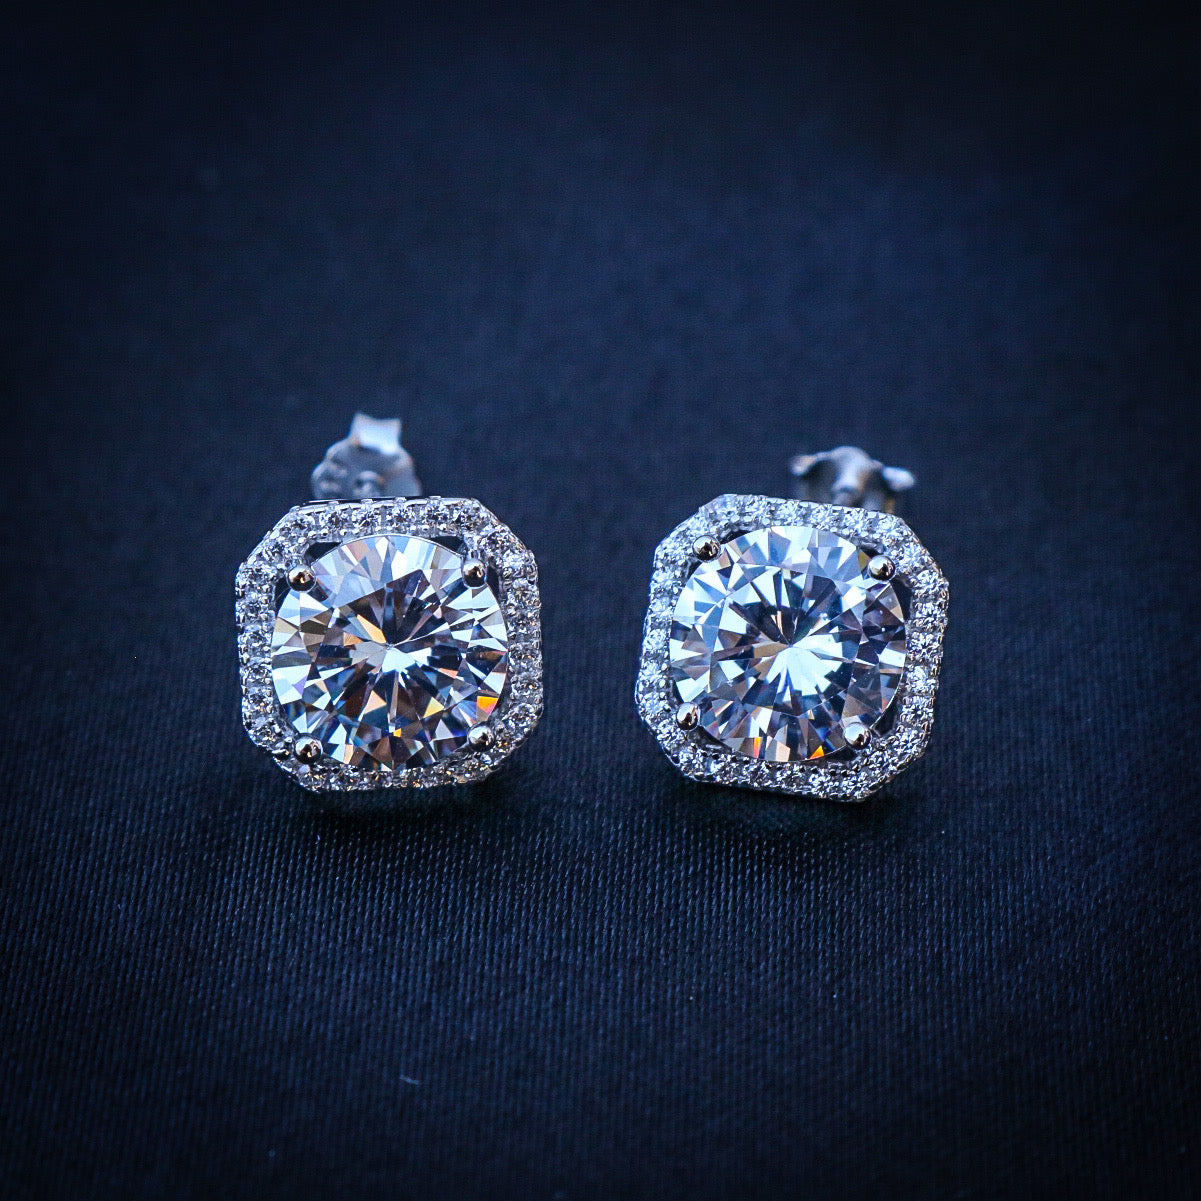 Iced out Diamond Stud Earrings - Real 925 Silver